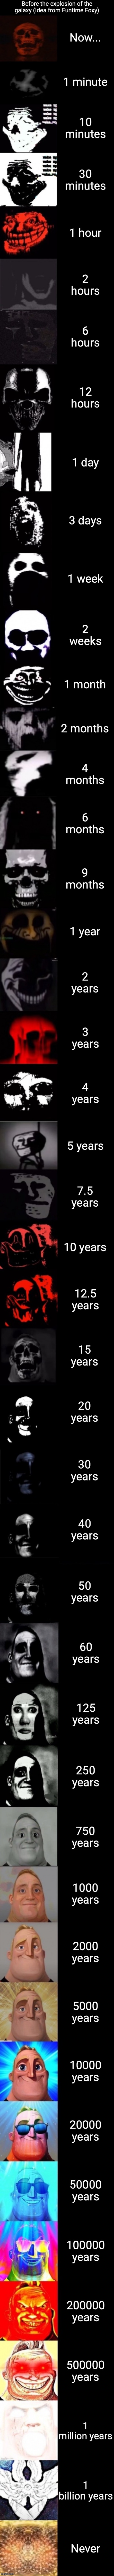 Mr Incredible Becoming Skull To God | Before the explosion of the galaxy (Idea from Funtime Foxy); Now... 1 minute; 10 minutes; 30 minutes; 1 hour; 2 hours; 6 hours; 12 hours; 1 day; 3 days; 1 week; 2 weeks; 1 month; 2 months; 4 months; 6 months; 9 months; 1 year; 2 years; 3 years; 4 years; 5 years; 7.5 years; 10 years; 12.5 years; 15 years; 20 years; 30 years; 40 years; 50 years; 60 years; 125 years; 250 years; 750 years; 1000 years; 2000 years; 5000 years; 10000 years; 20000 years; 50000 years; 100000 years; 200000 years; 500000 years; 1 million years; 1 billion years; Never | image tagged in mr incredible becoming skull to god | made w/ Imgflip meme maker